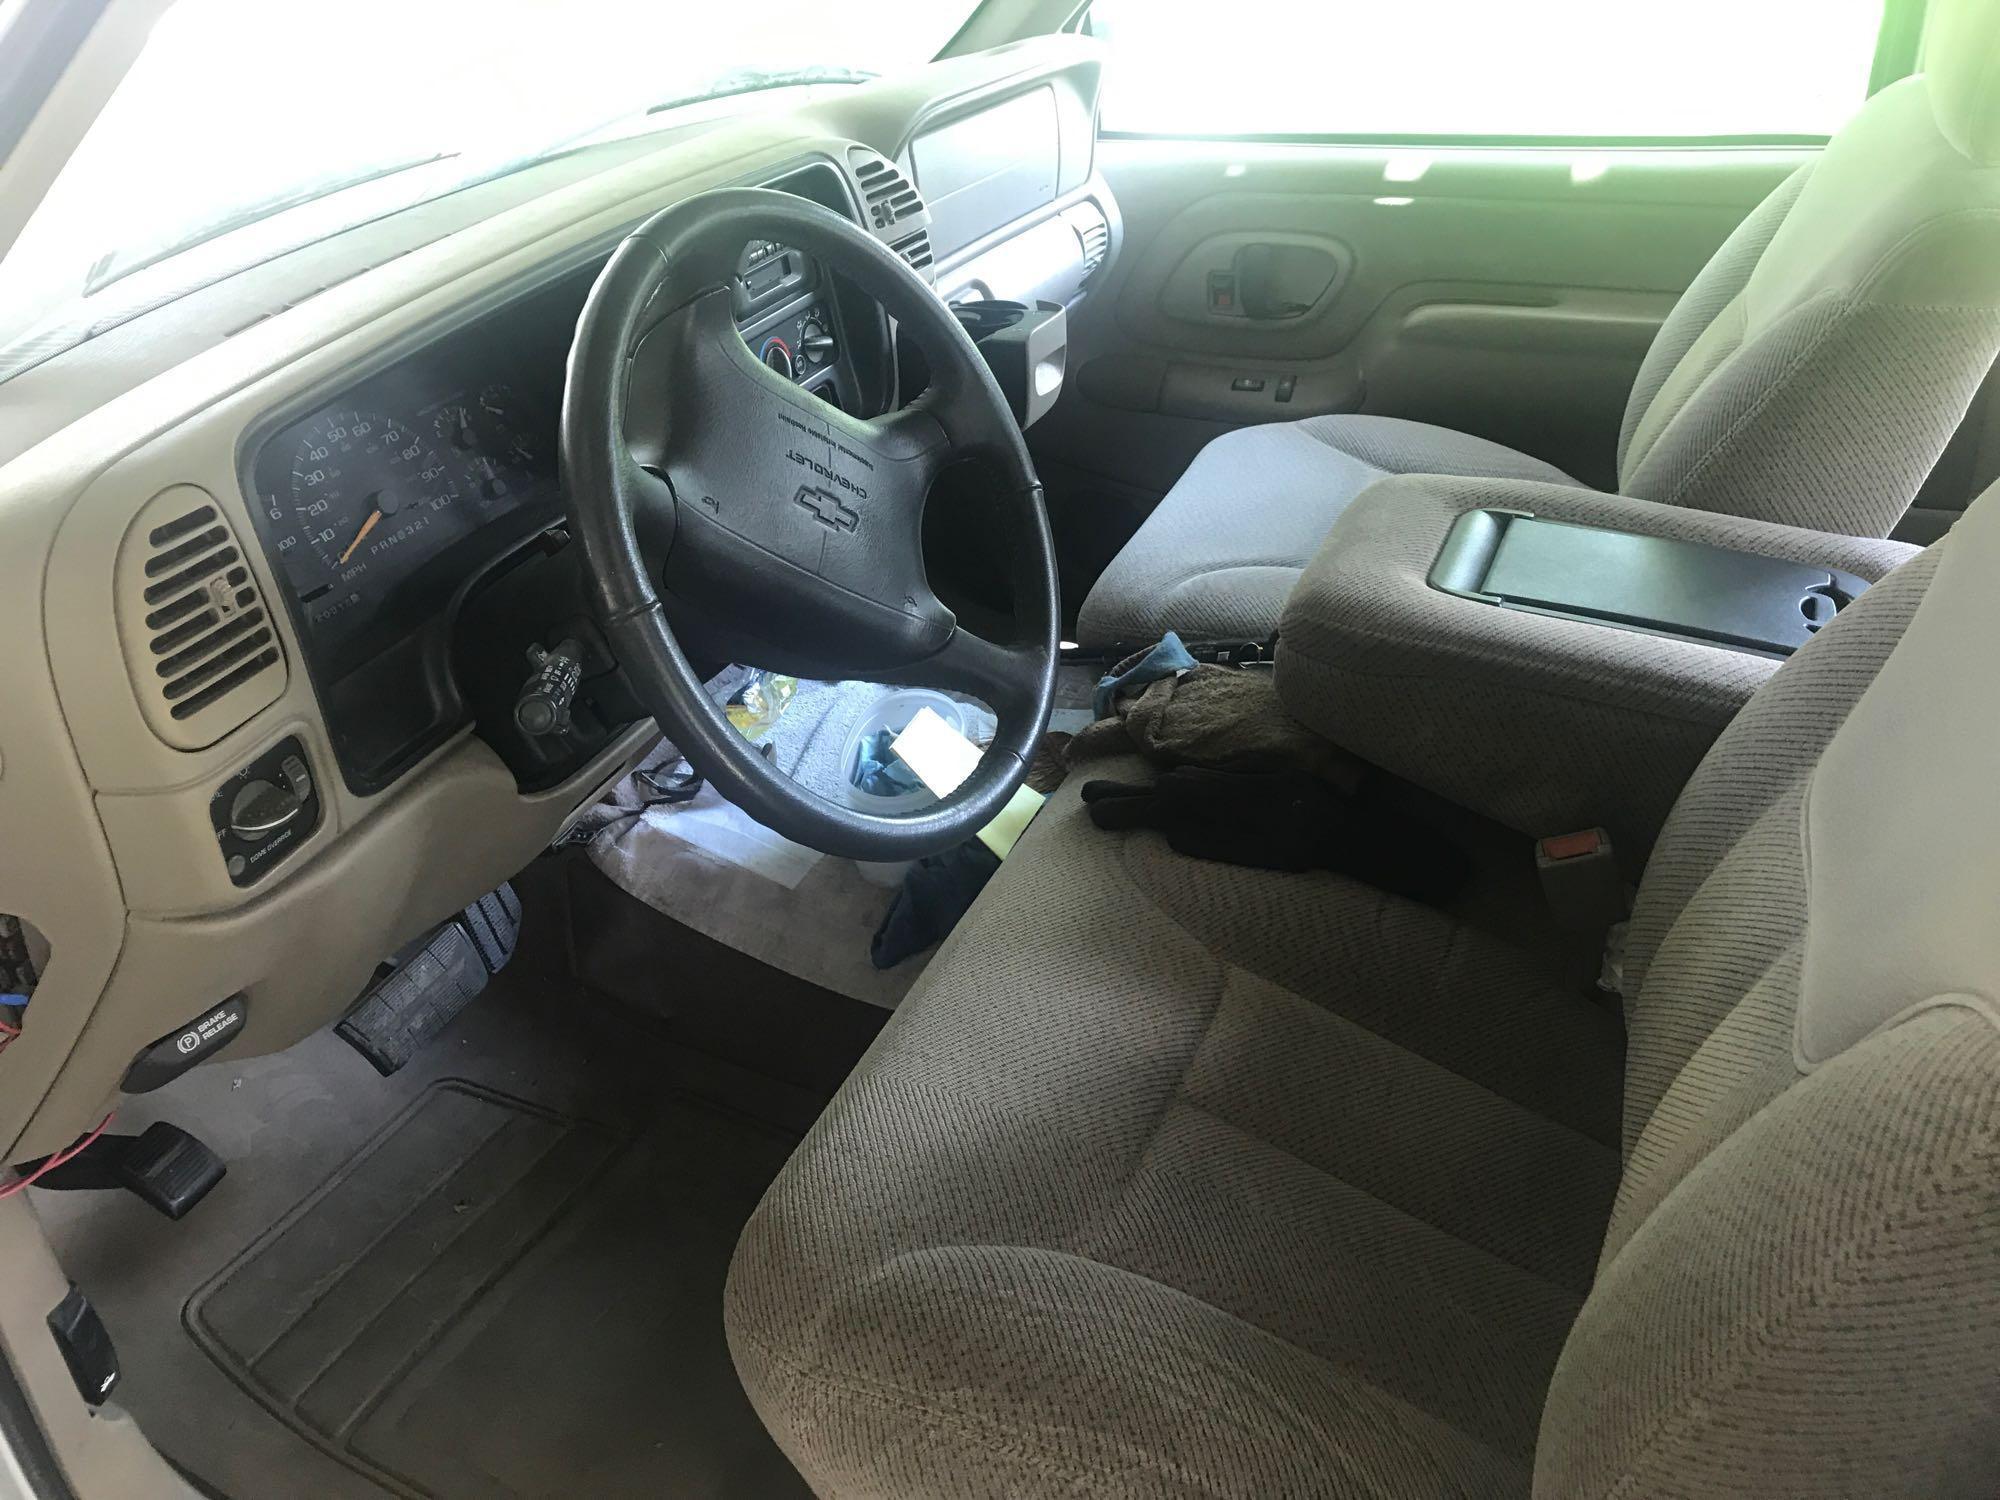 1997 Chevy Silverado C1500 ext. cab Pickup, am/fm, a/c, Protective bedliner, hitch, 112,000 miles